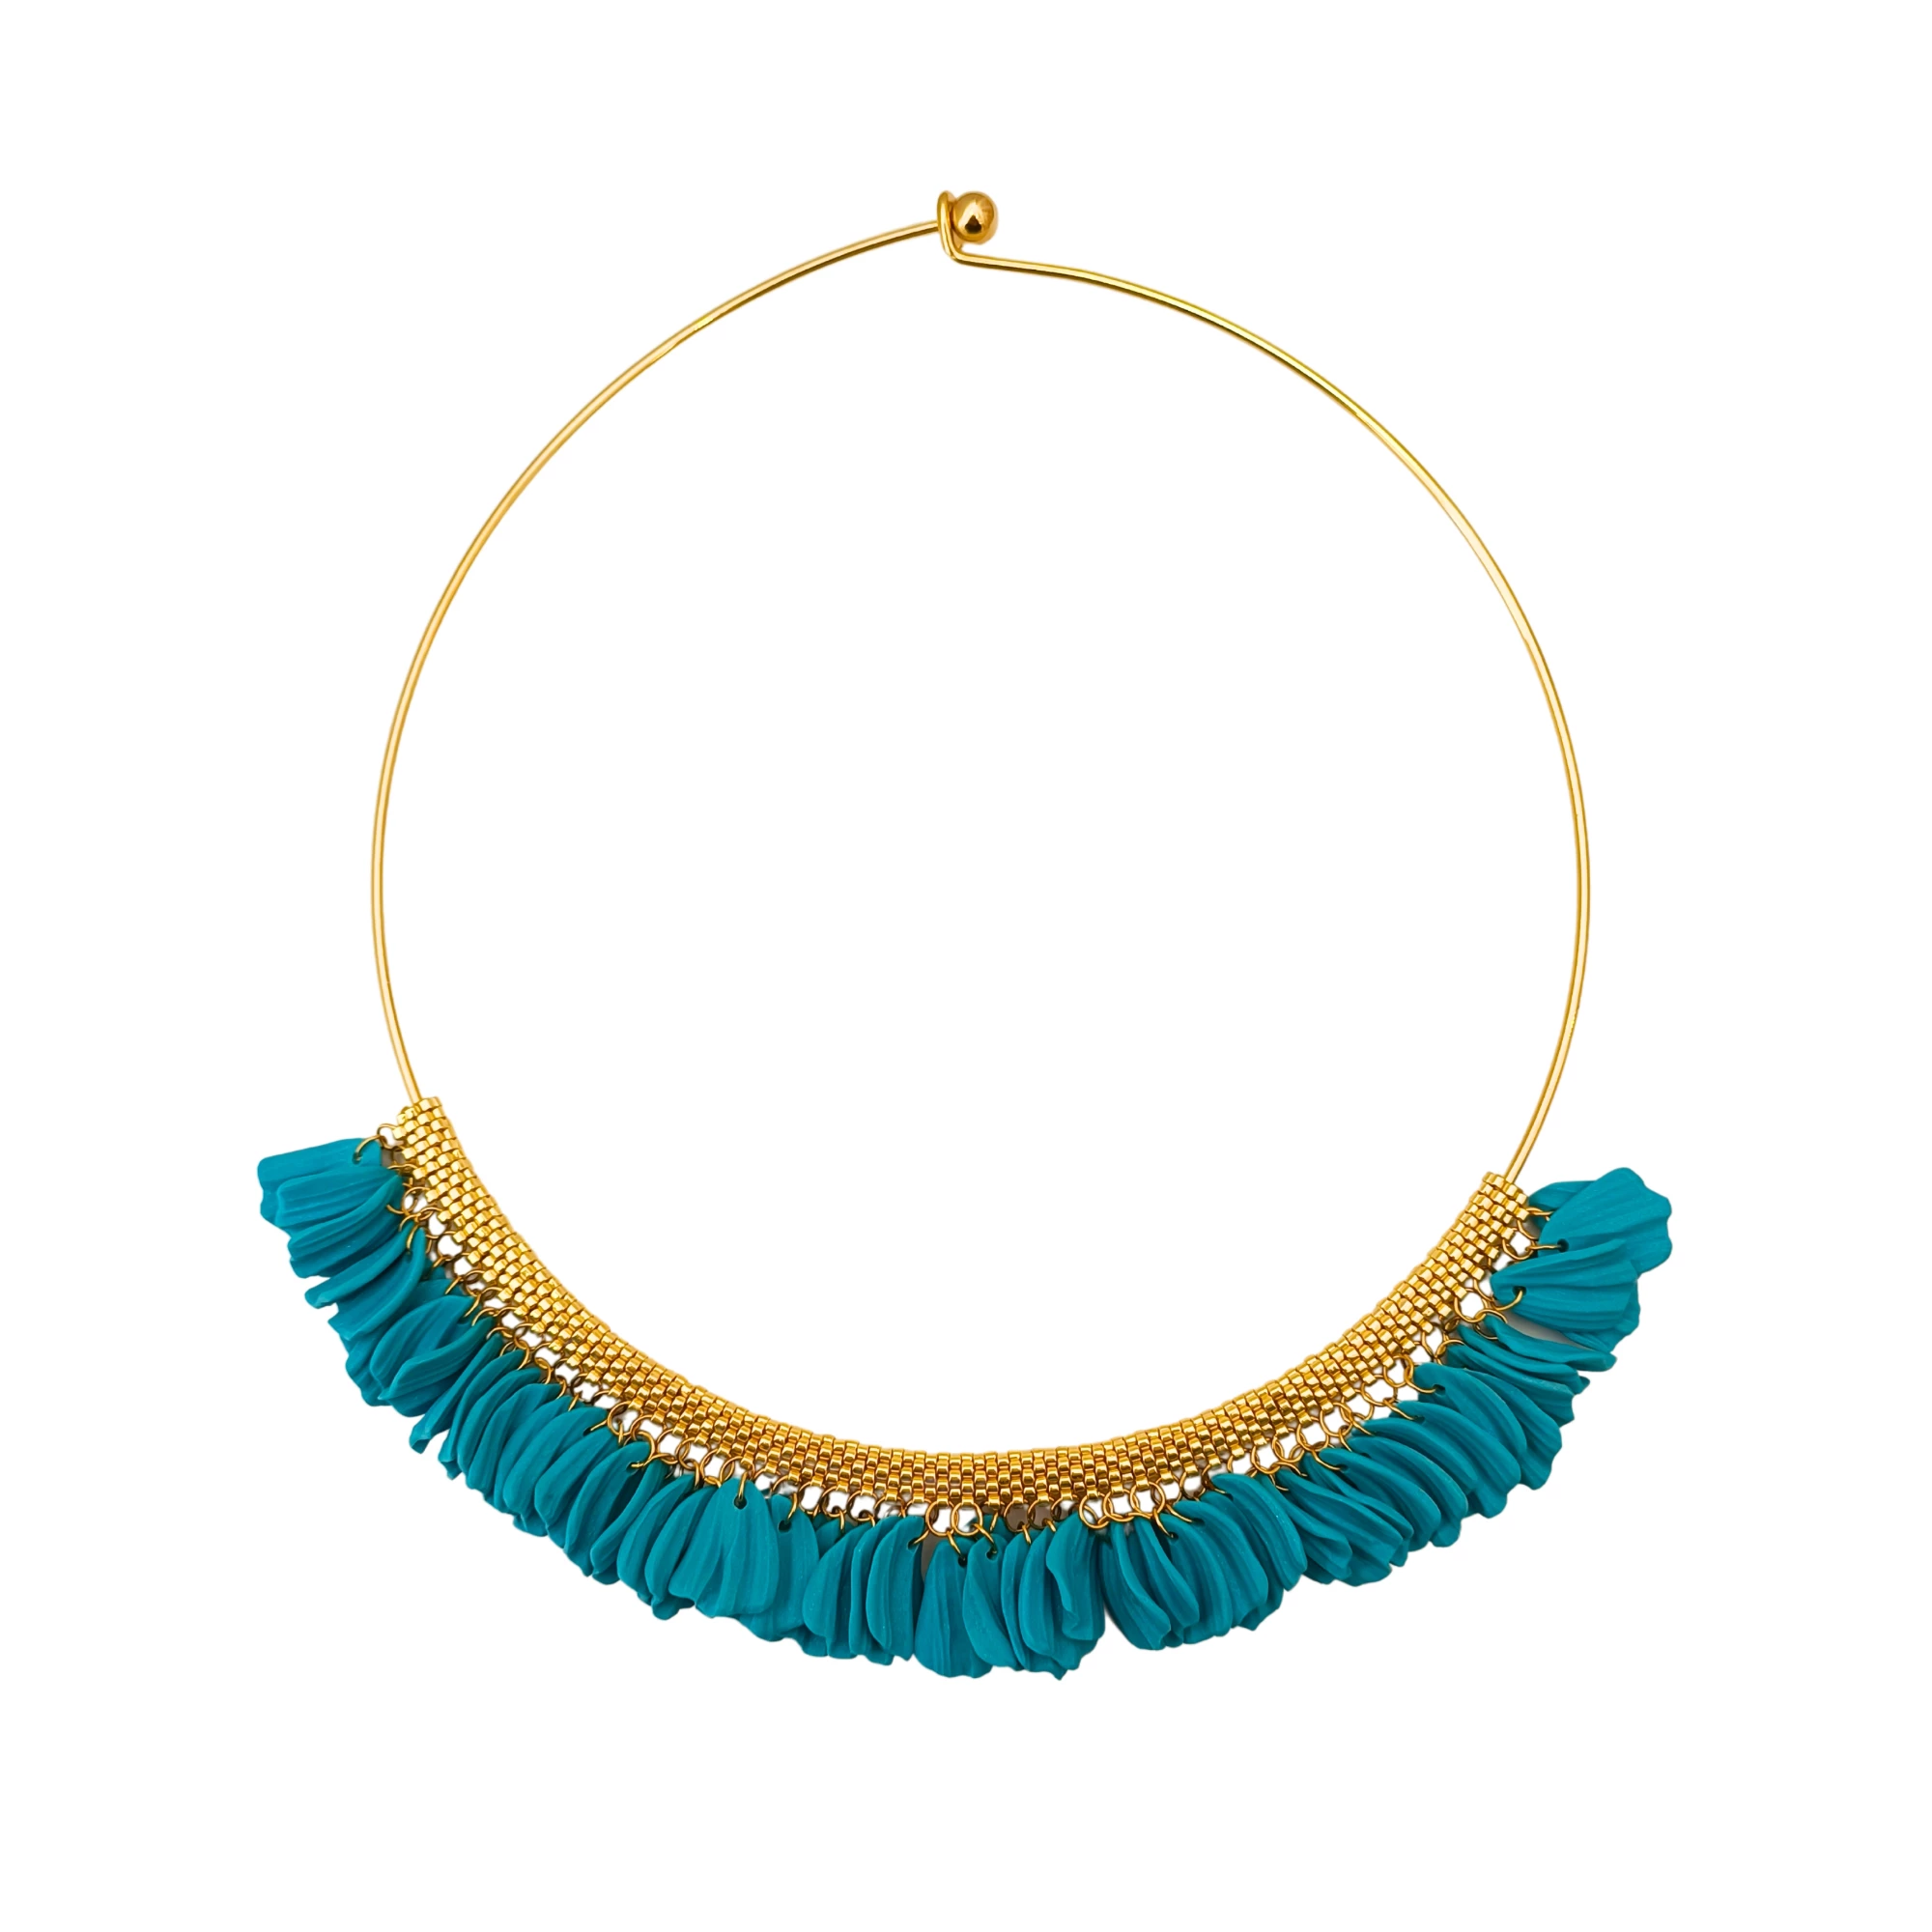 Gold Collar Necklace With Blue Petals